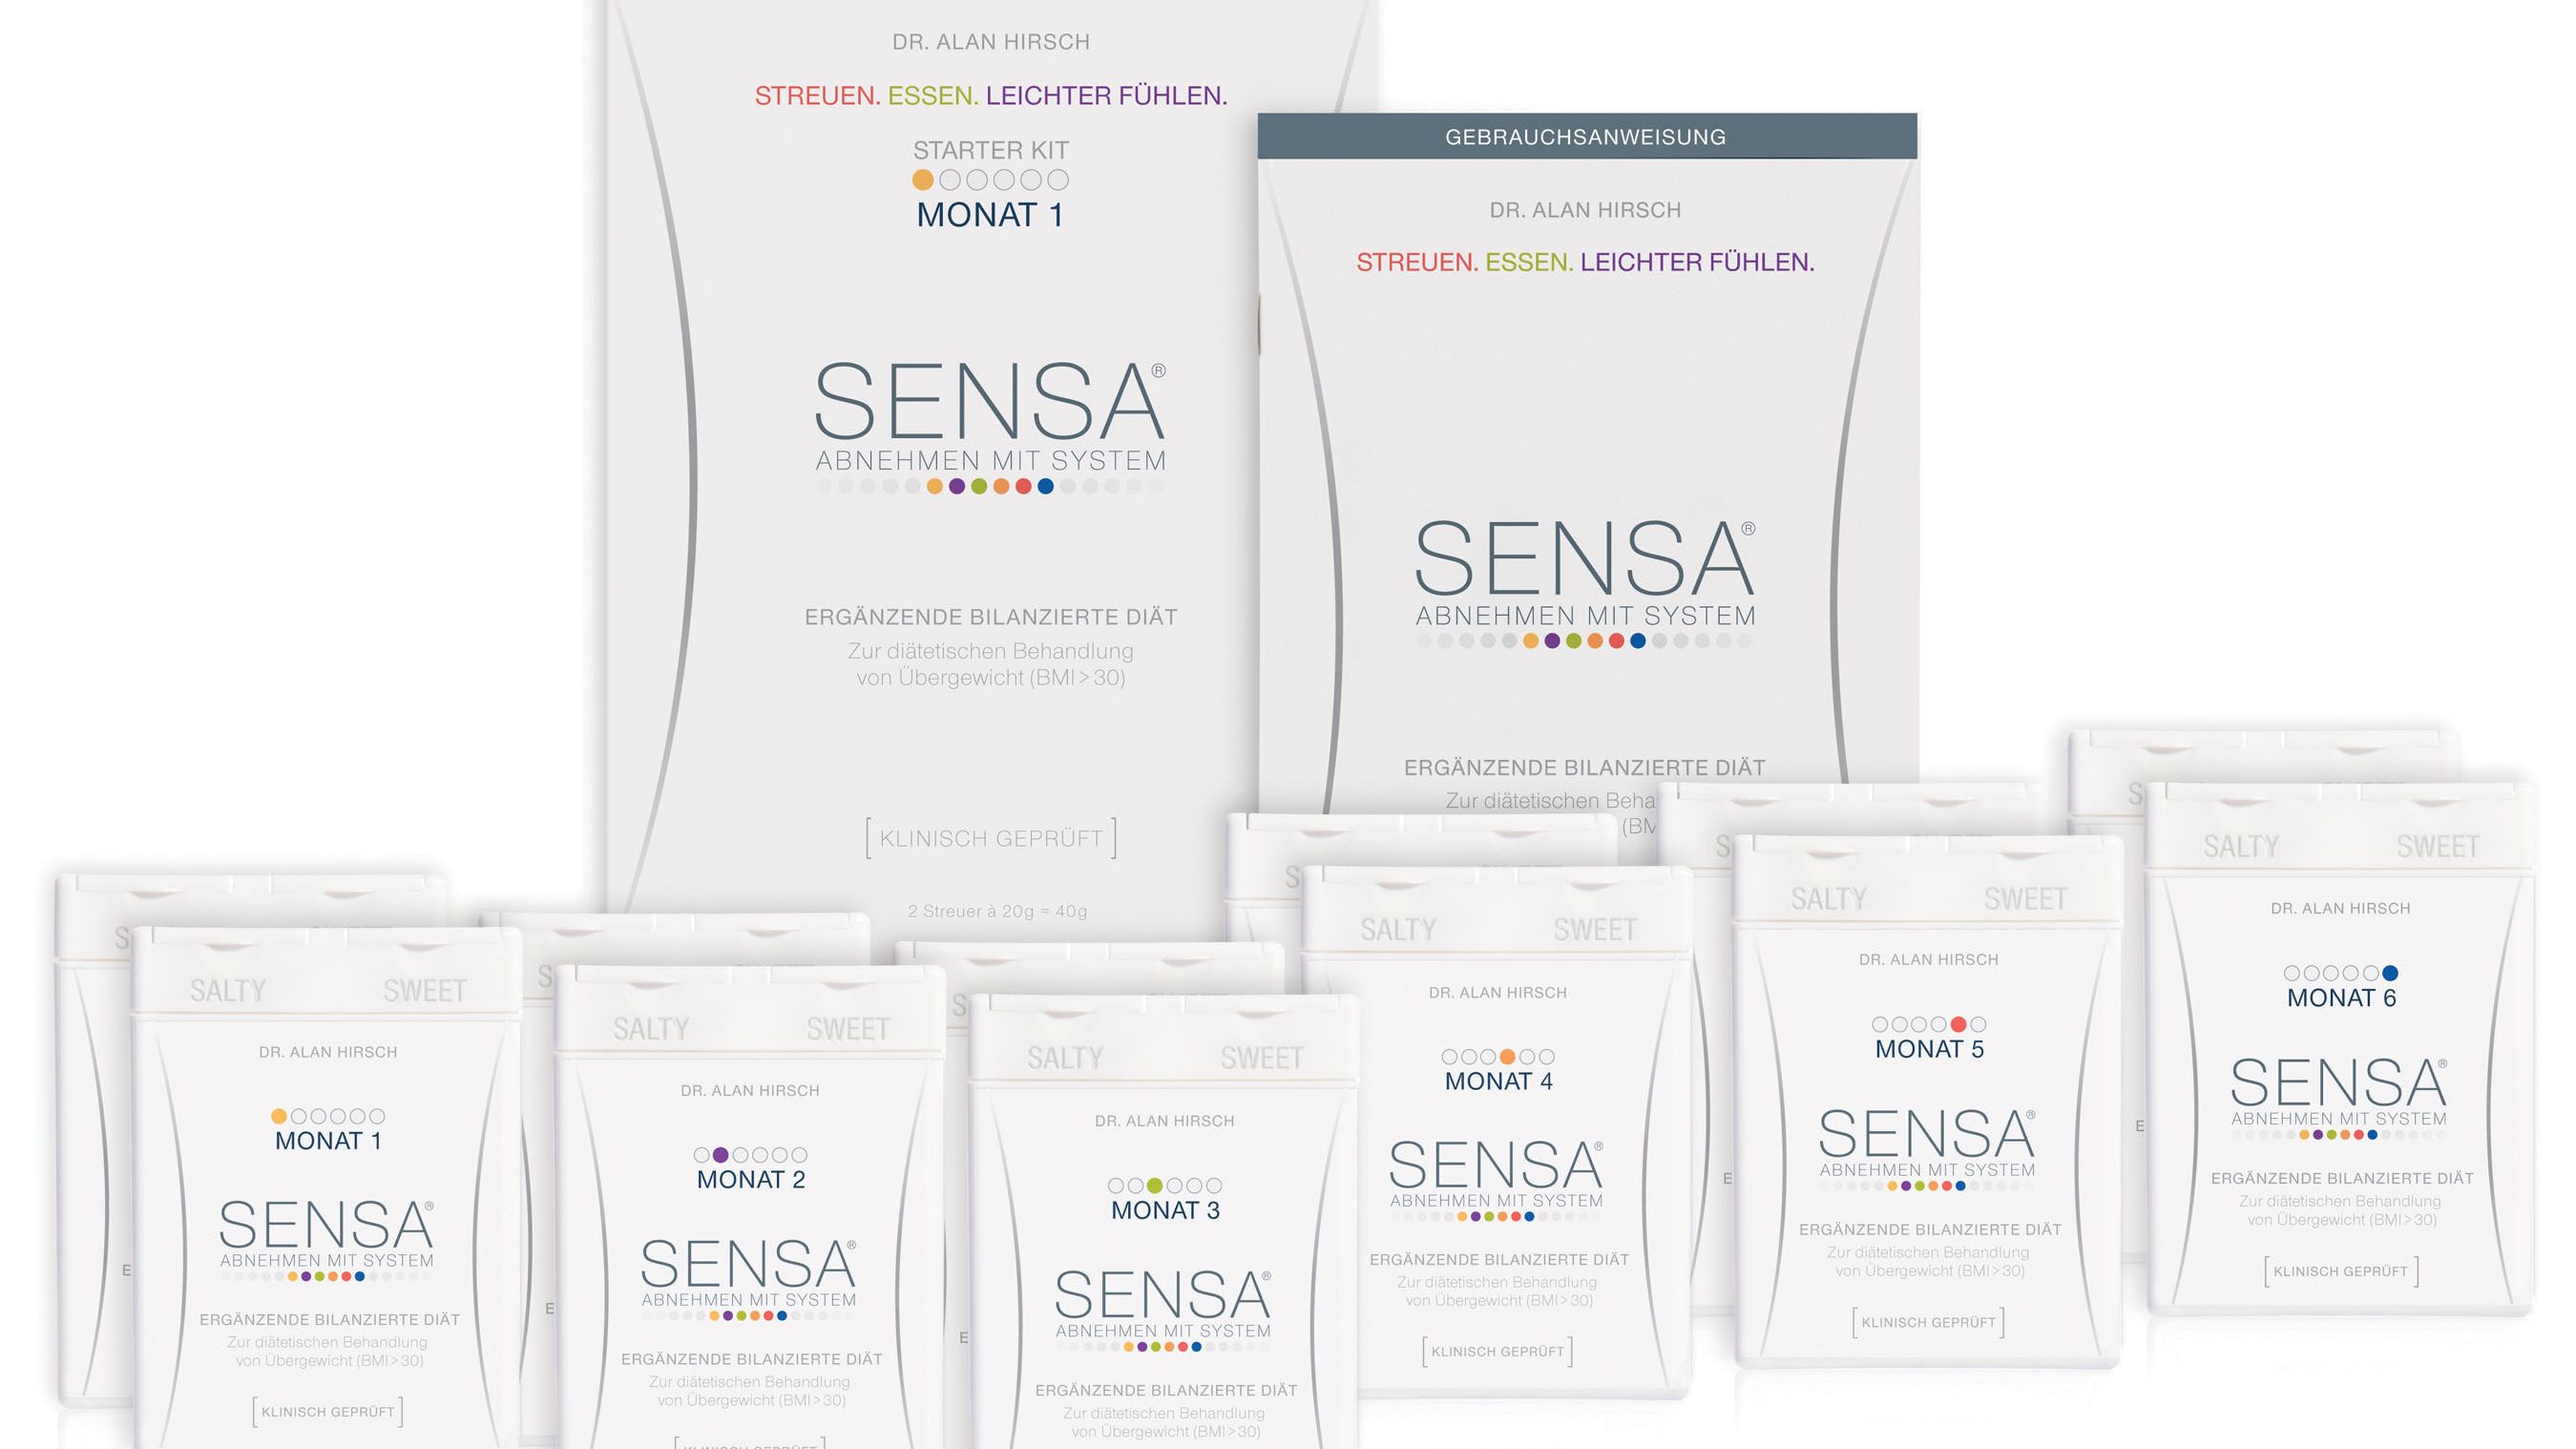 Sensa's advertising claimed  it is clinically proven to help people lose an average of 30 pounds without dieting or exercise.